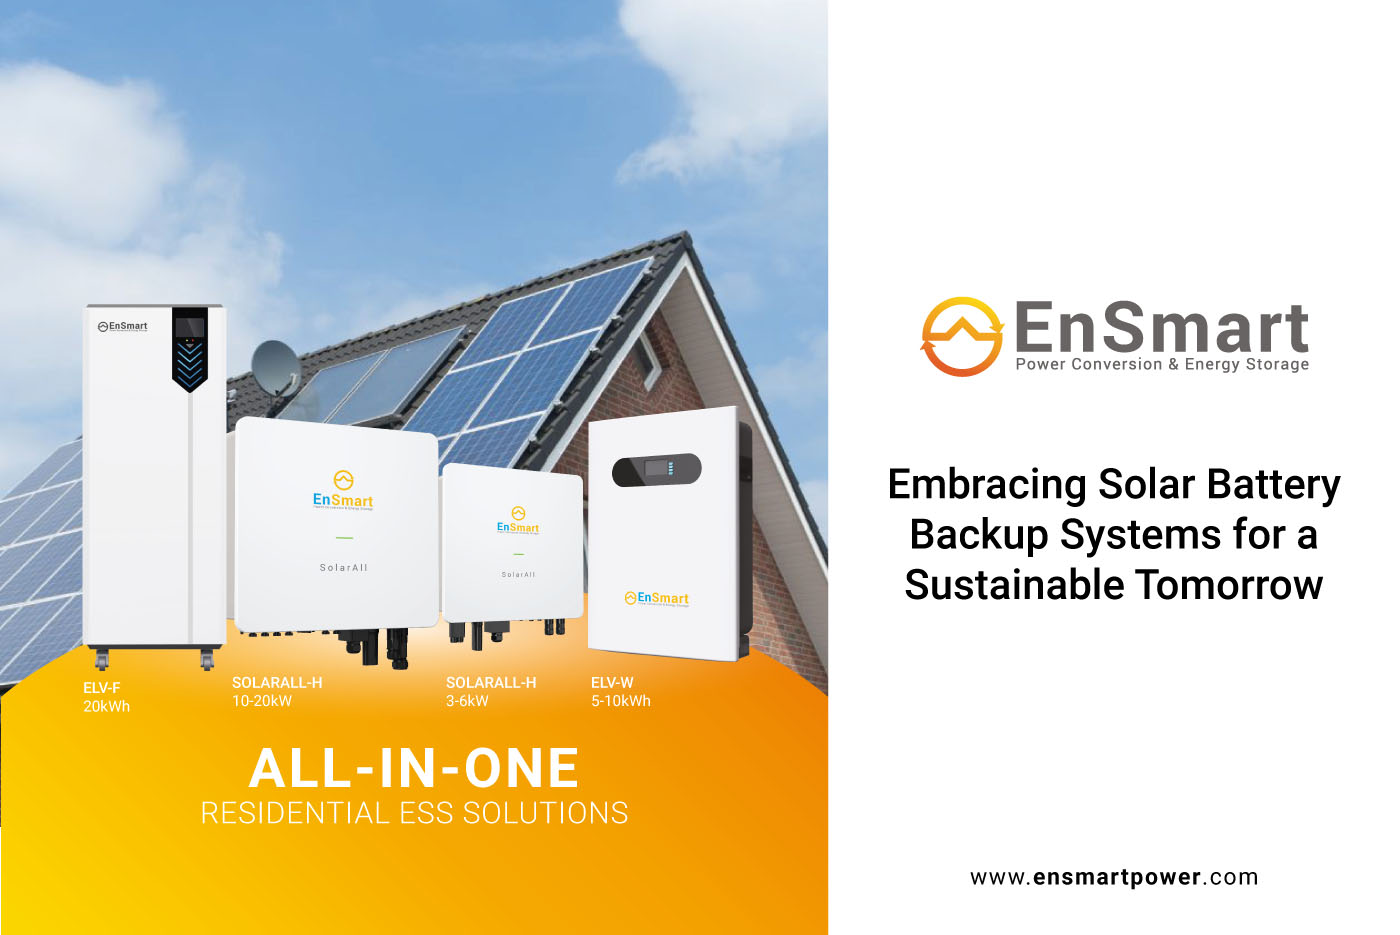 Embracing Solar Battery Backup Systems for a Sustainable Tomorrow